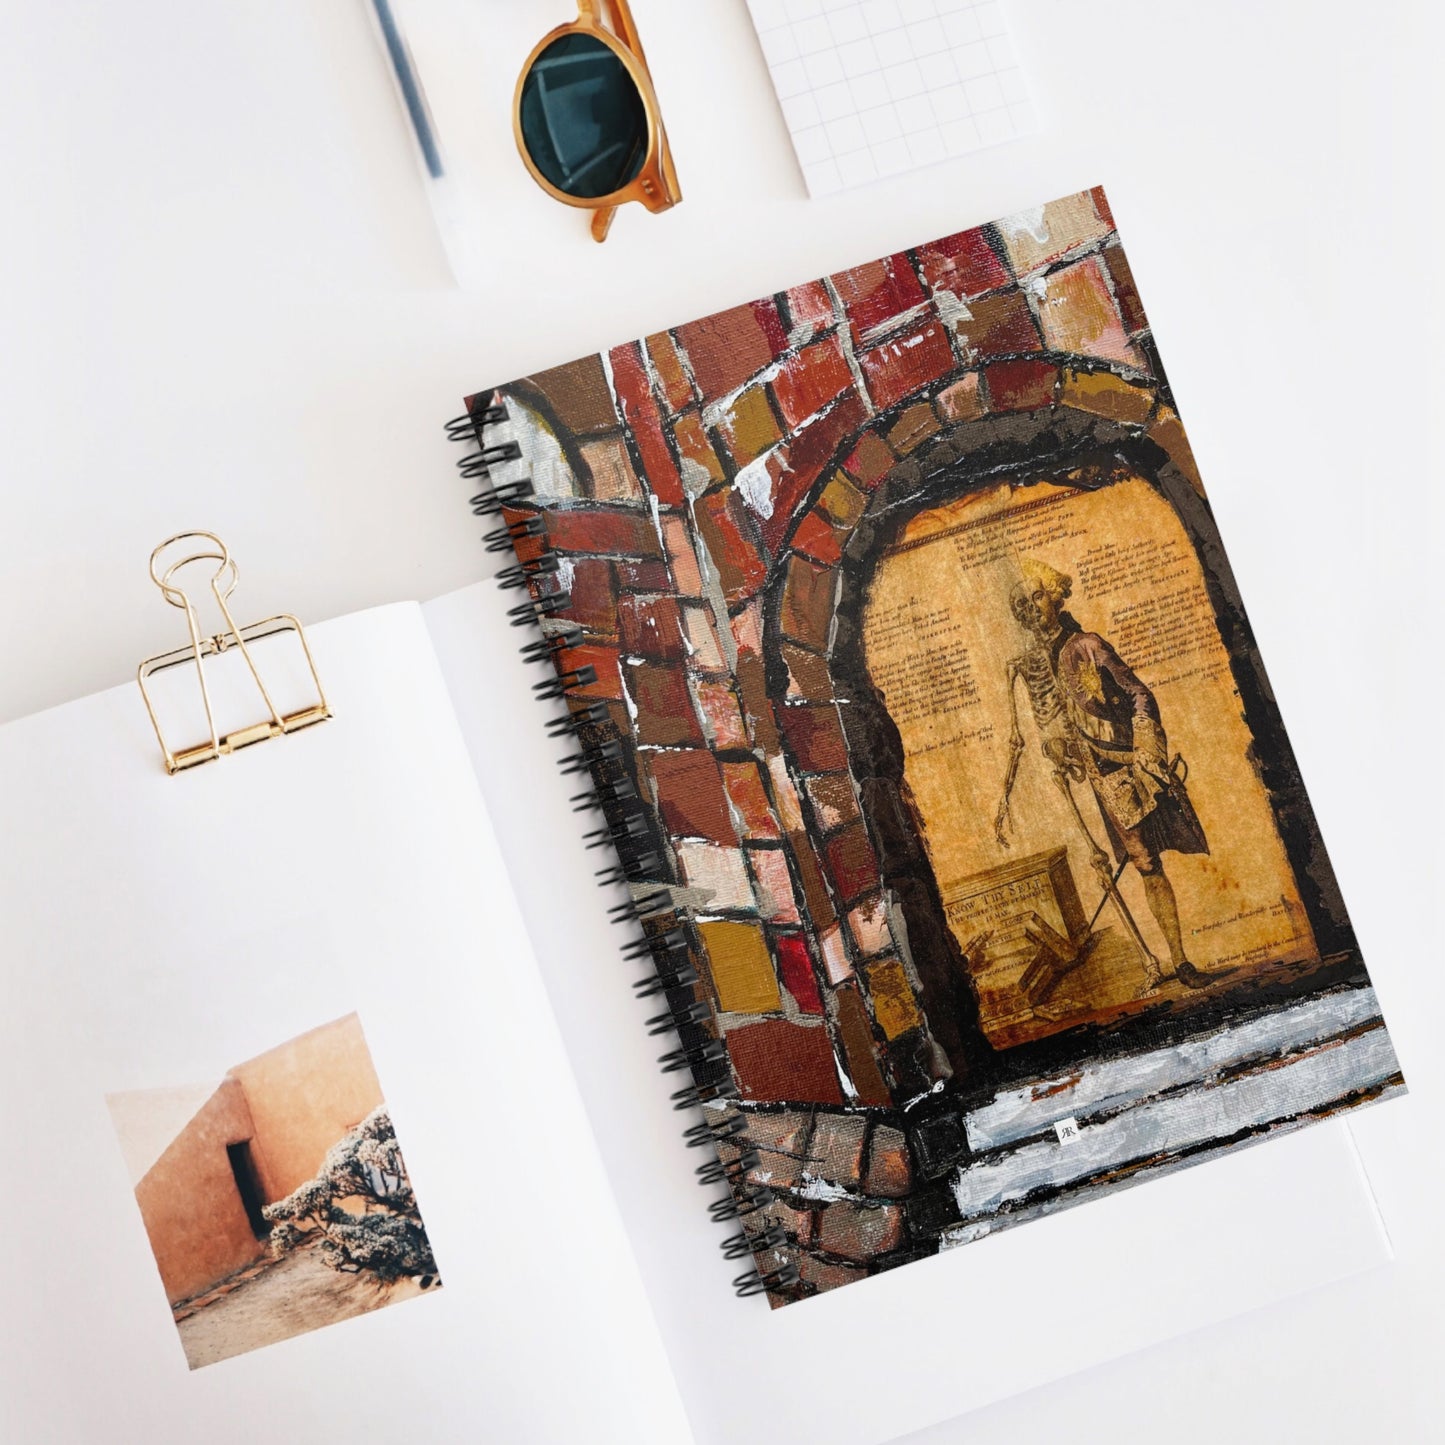 Chateau Spooky Spiral Notebook